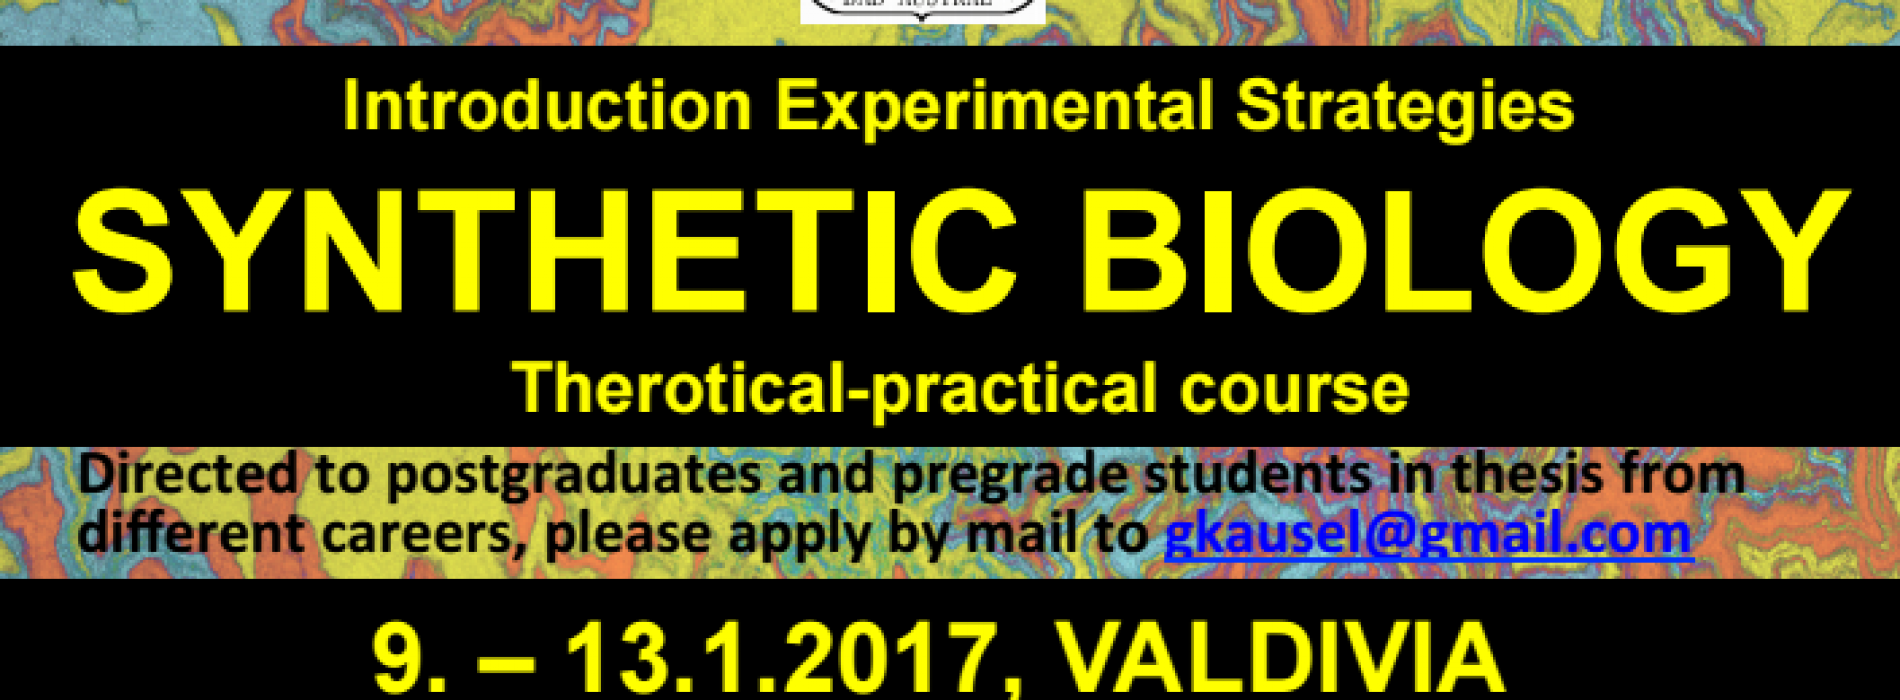 Introduction Experimental Strategies Synthetic Biology Therotical-practical course